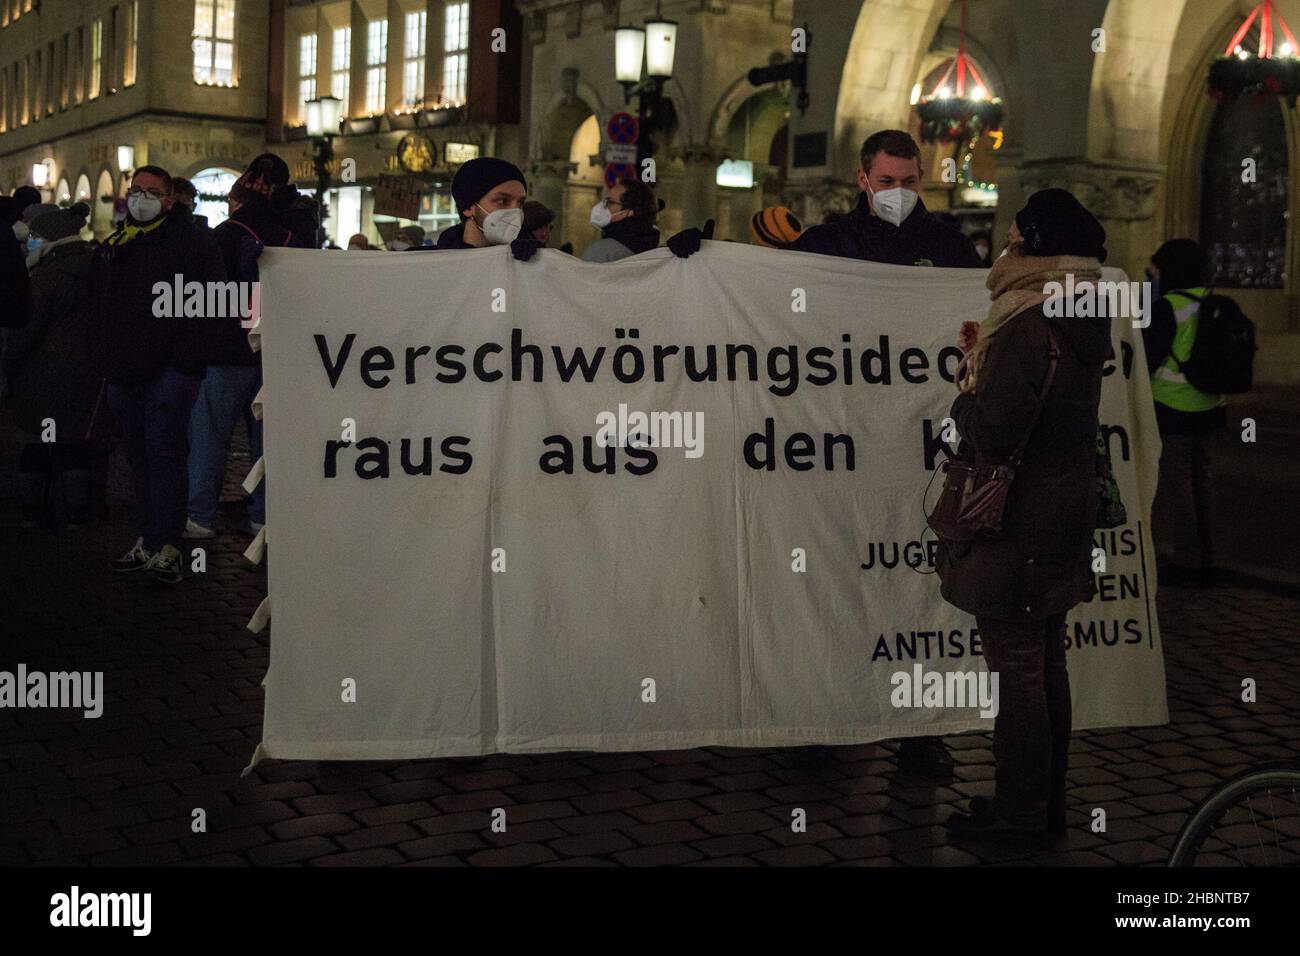 Münster, NRW, Germany. 20th Dec, 2021. Protesters with a placard urging to 'keep conspiracy ideologies out'. Activists and protesters from several organisations have congregated in the city centre, protesting against conspiracy theories, racism, anti-semitism and social segregation, and for vaccinations. Credit: Imageplotter/Alamy Live News Stock Photo